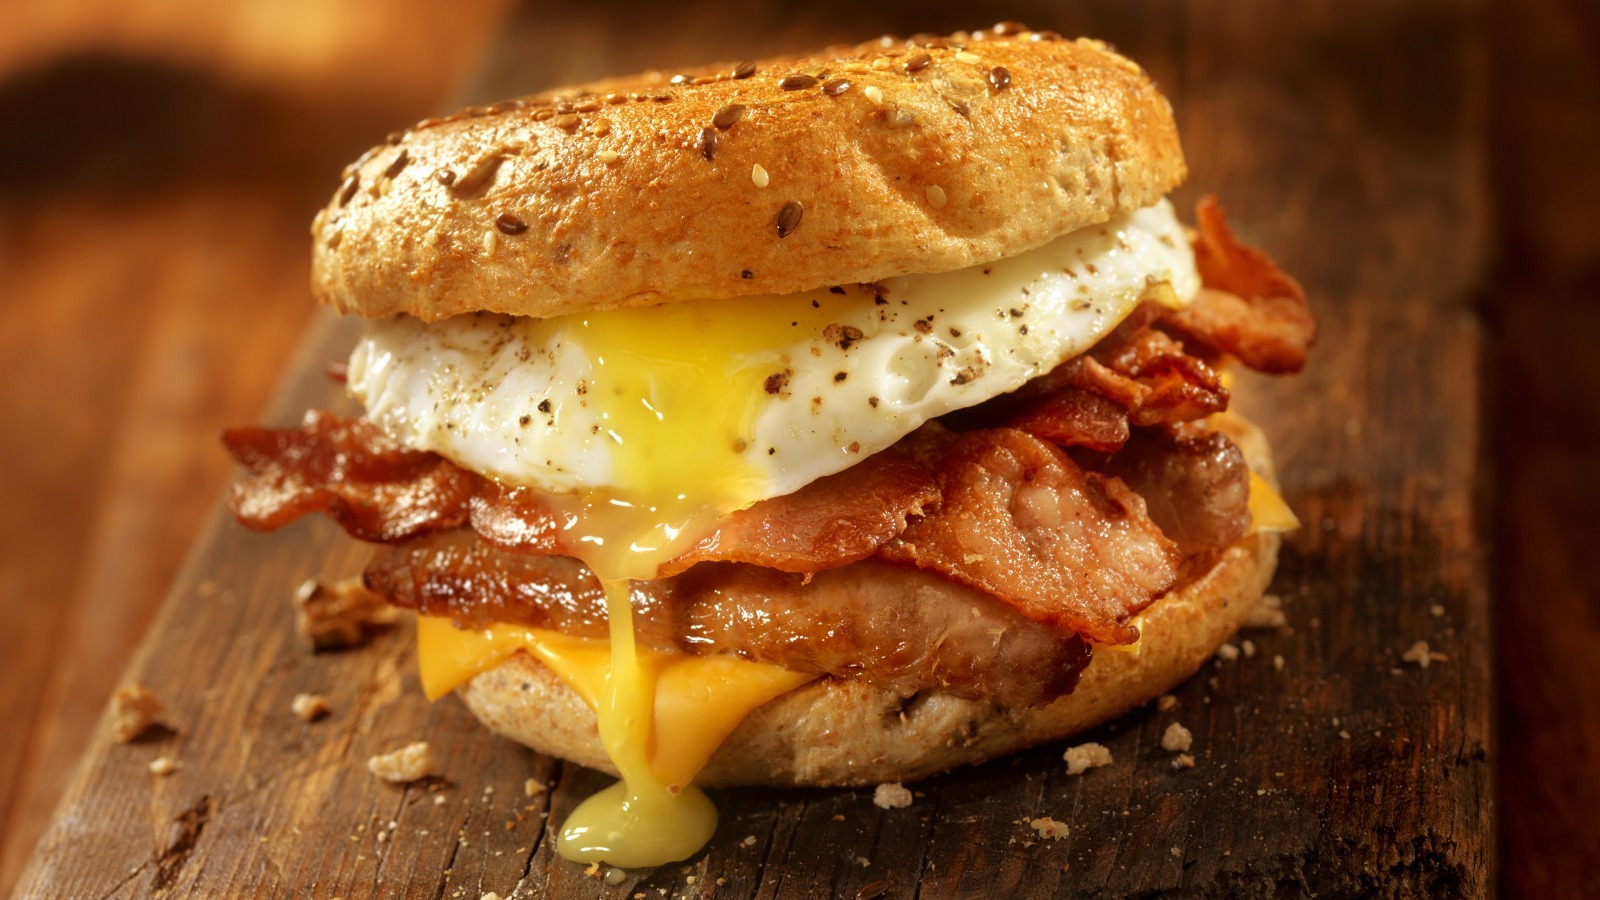 https://www.tastingtable.com/img/gallery/15-tips-you-need-when-making-fried-egg-sandwiches/l-intro-1688373301.jpg